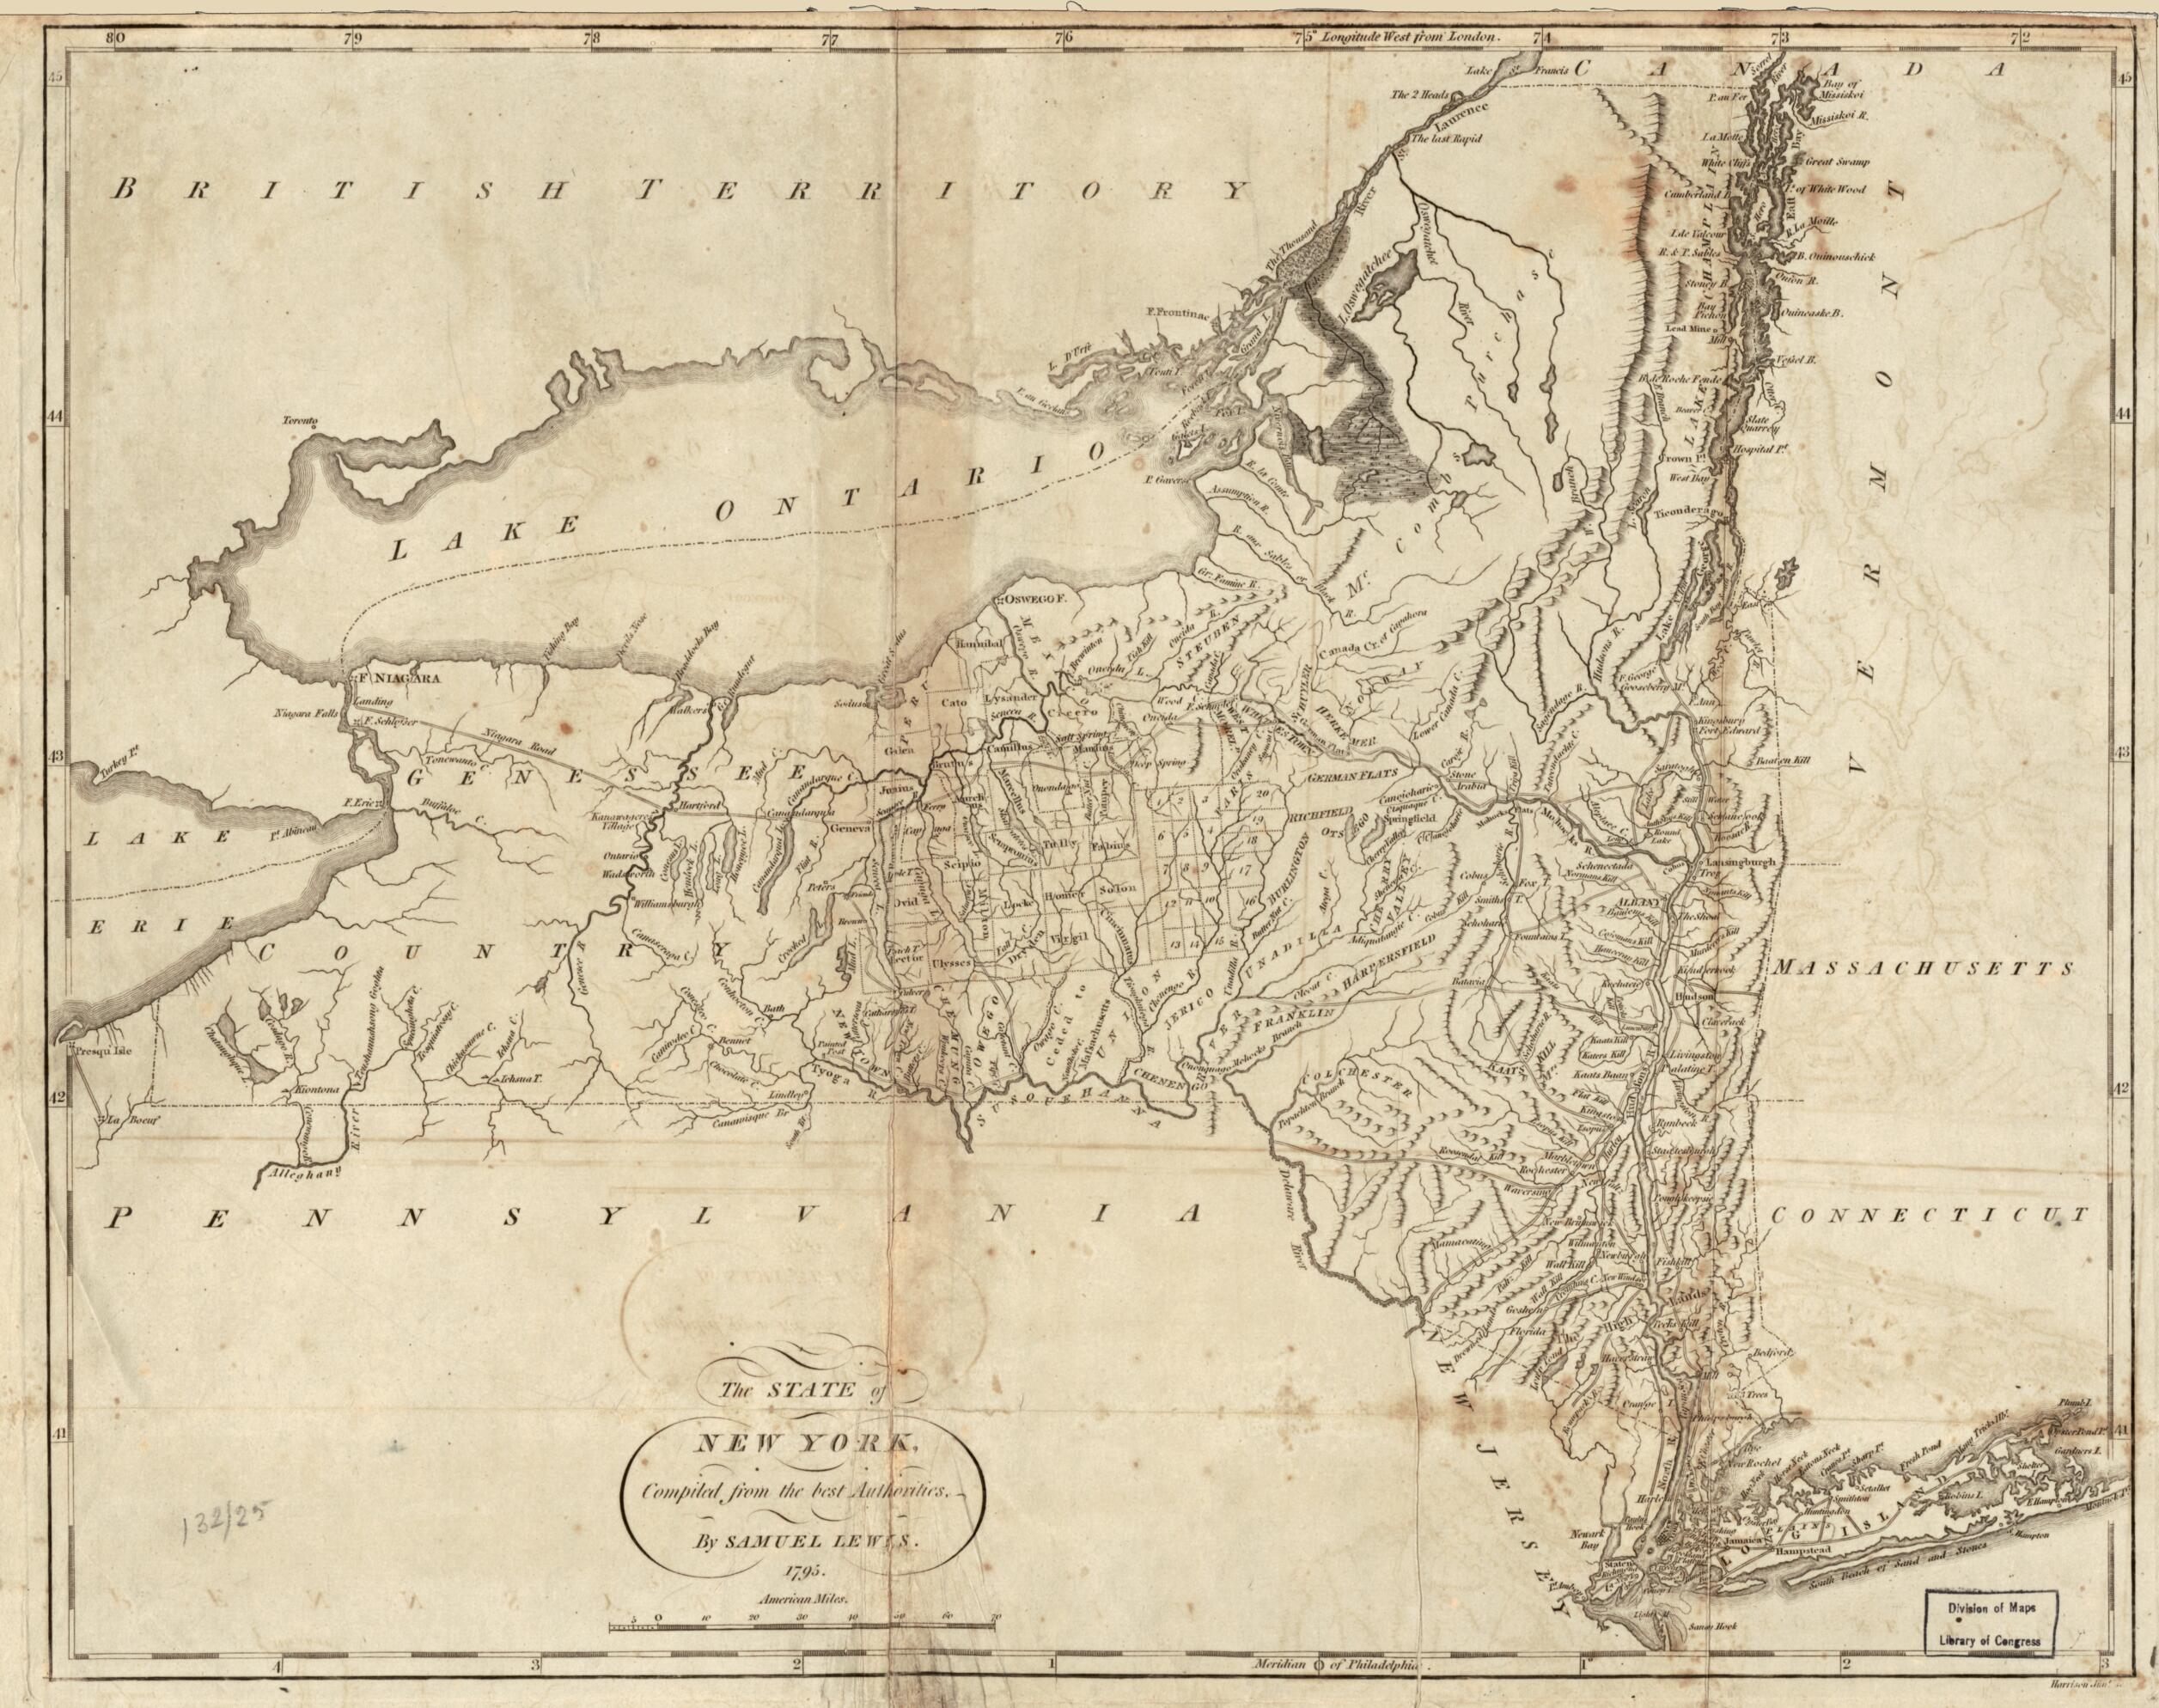 This old map of The State of New York from 1795 was created by Mathew Carey, William Harrison, Samuel Lewis in 1795